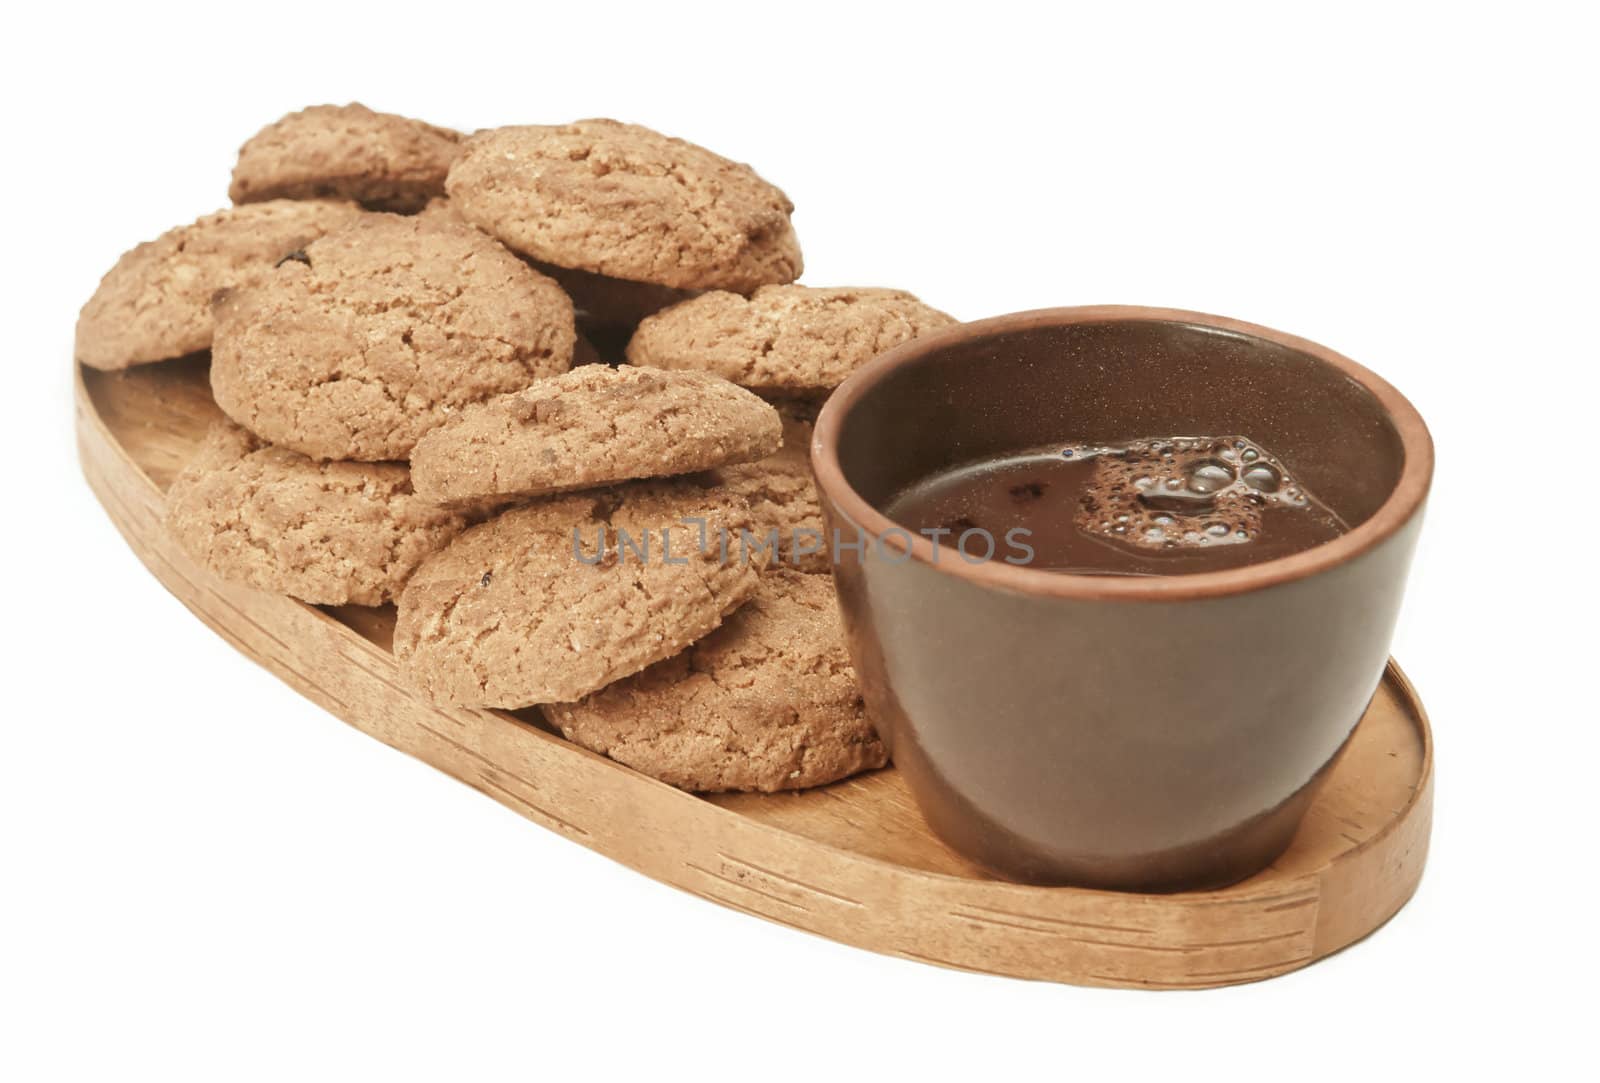 fresh cookie and warm cacao to morning meal on wooden tray